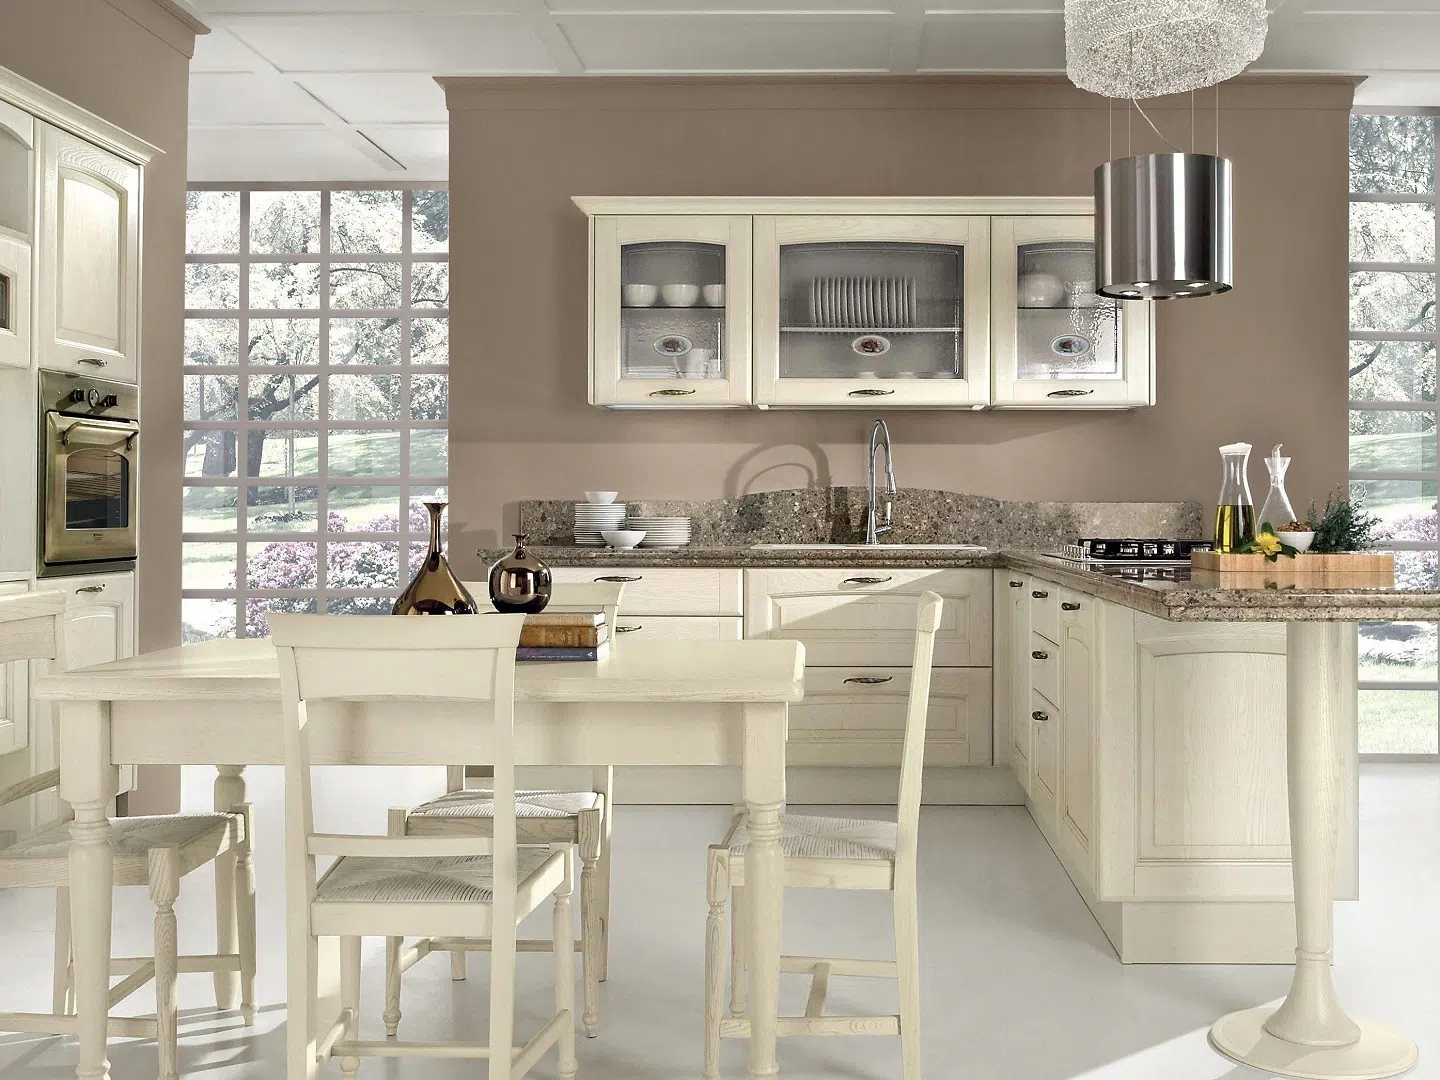  2. L-shaped kitchens for Openness and Flexibility